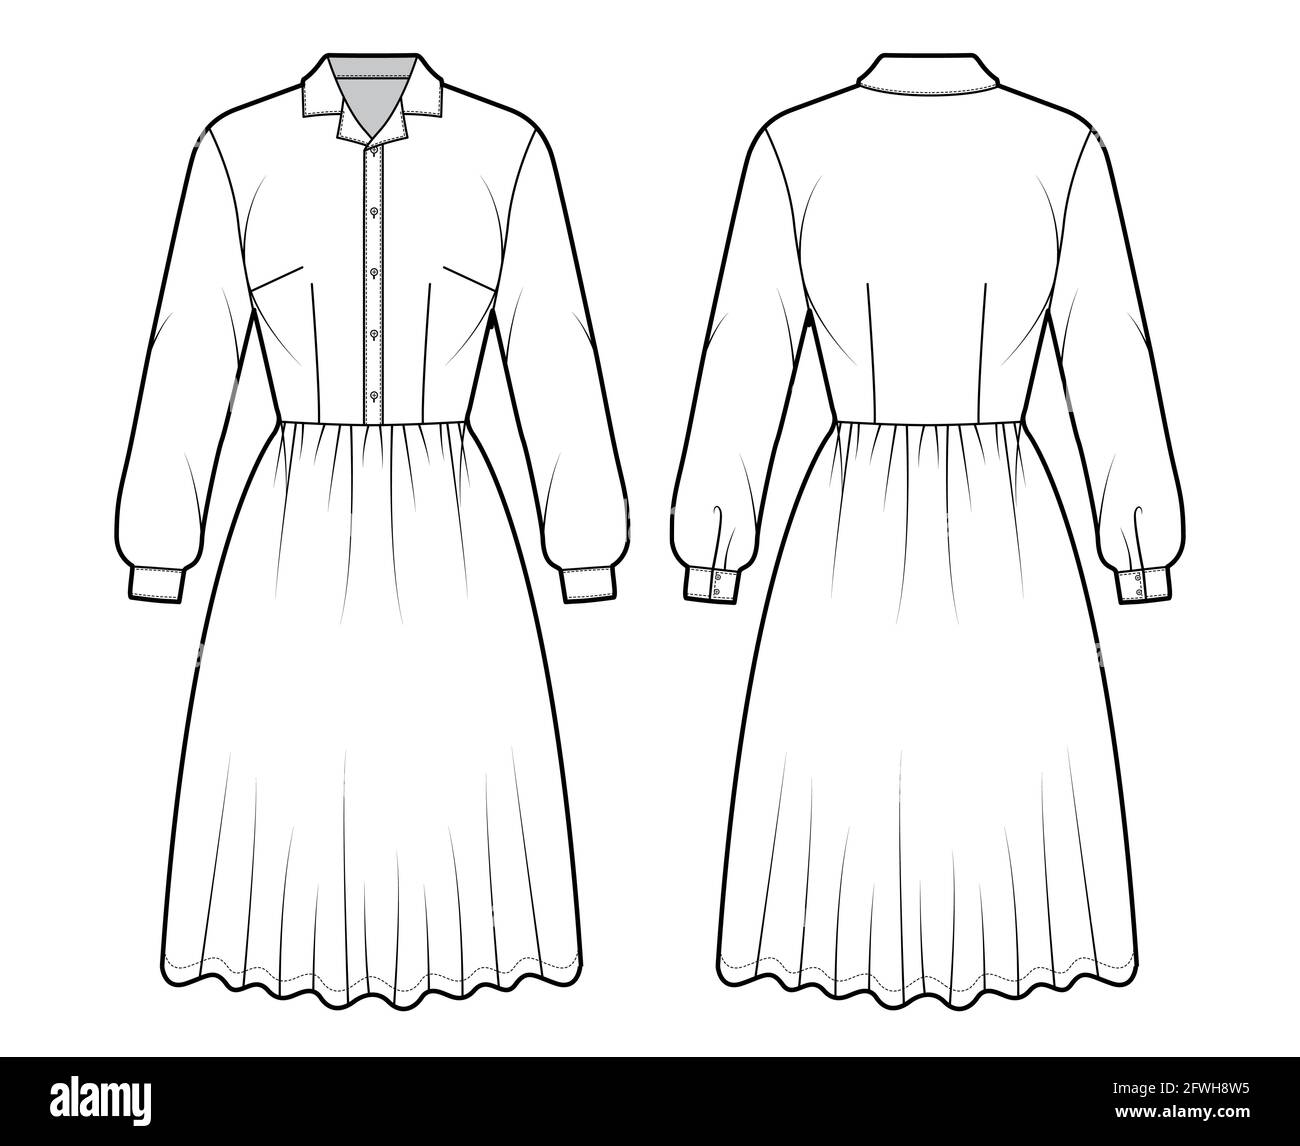 Dress house shirt technical fashion illustration with long sleeves with cuff, knee length full skirt, classic henley collar. Flat apparel front, back, white color style. Women, men unisex CAD mockup Stock Vector